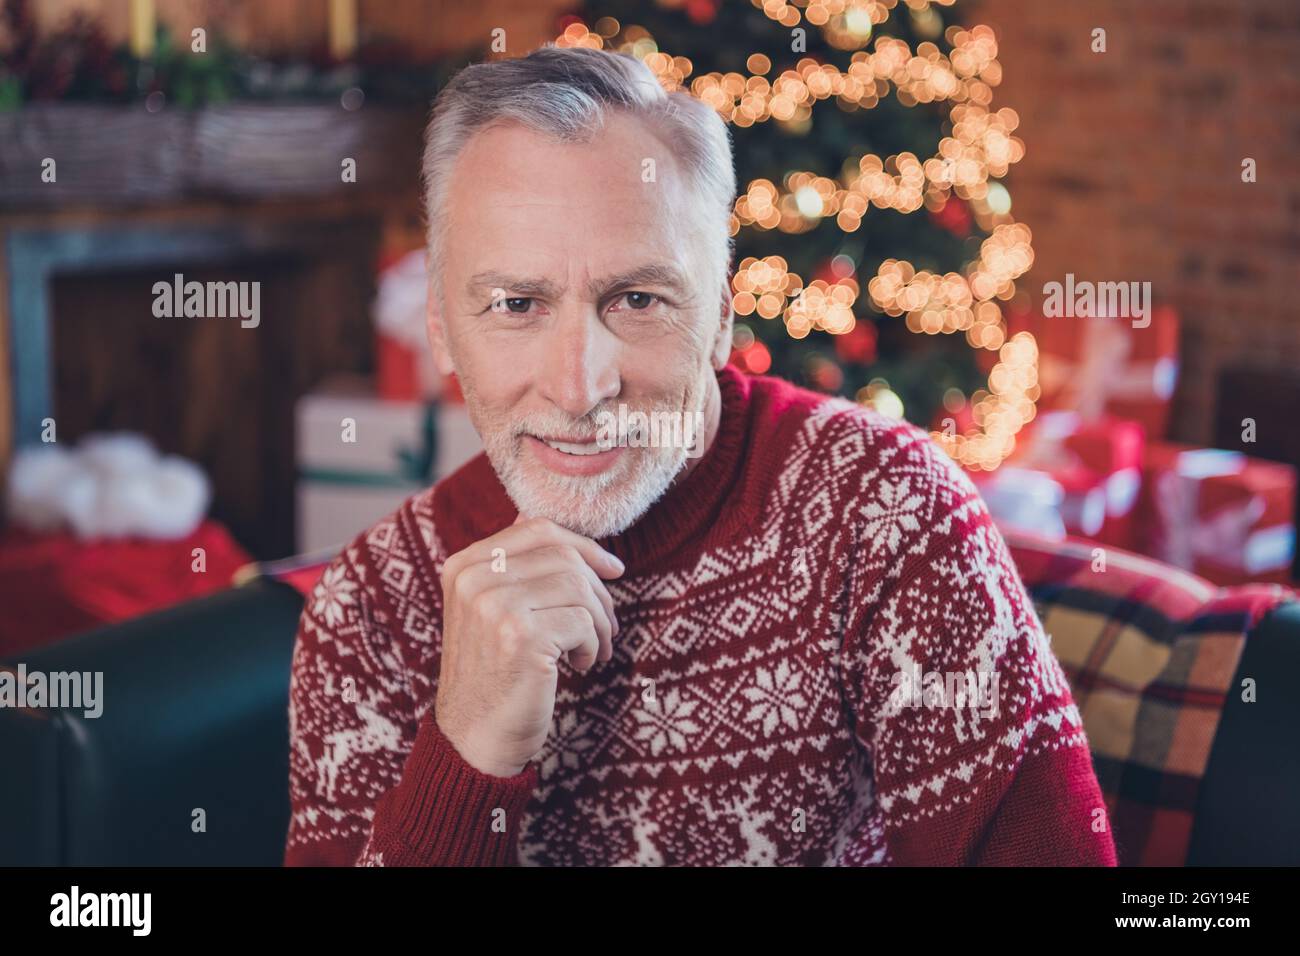 Photo portrait senior man smiling wearing sweater sitting on couch thoughtful Stock Photo